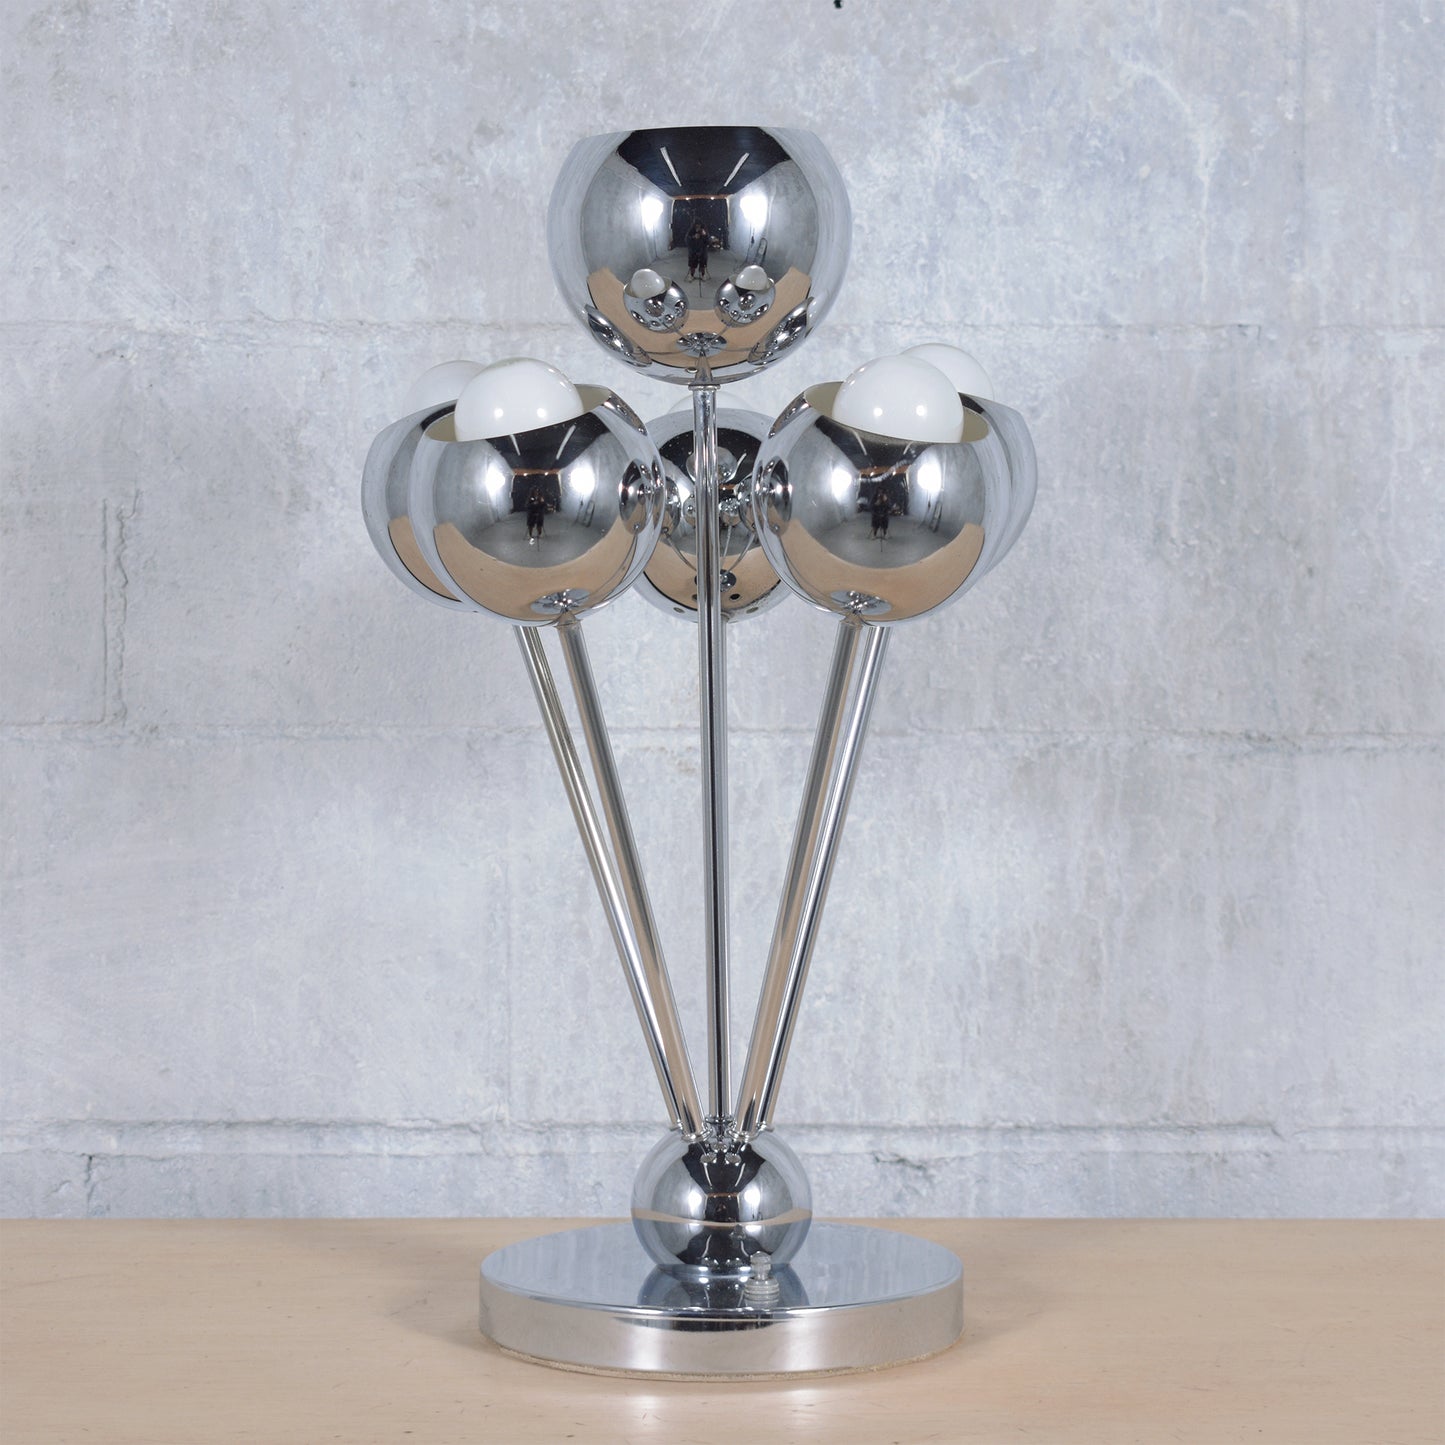 1960s Mid-Century Modern Chrome Table Lamp: Space Age Design Restored